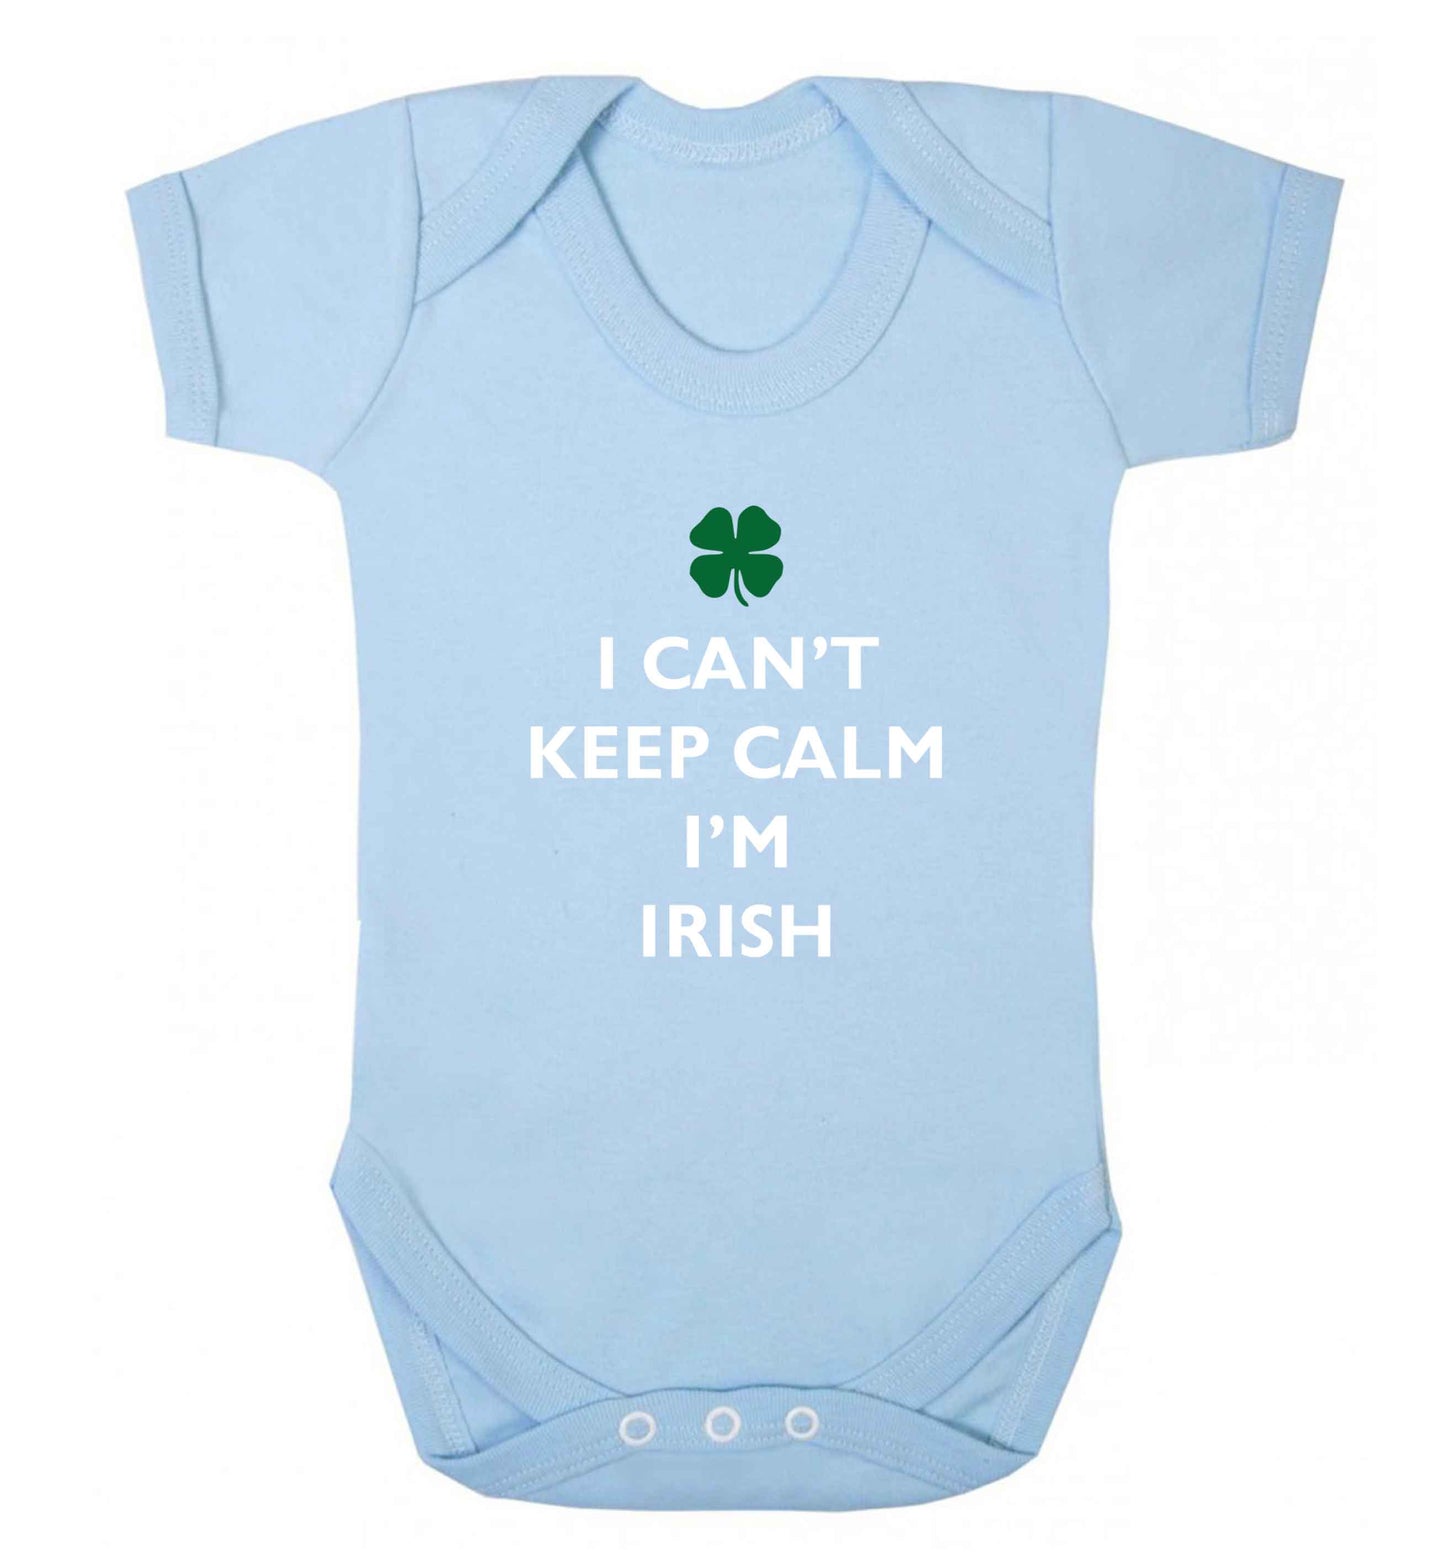 I can't keep calm I'm Irish baby vest pale blue 18-24 months